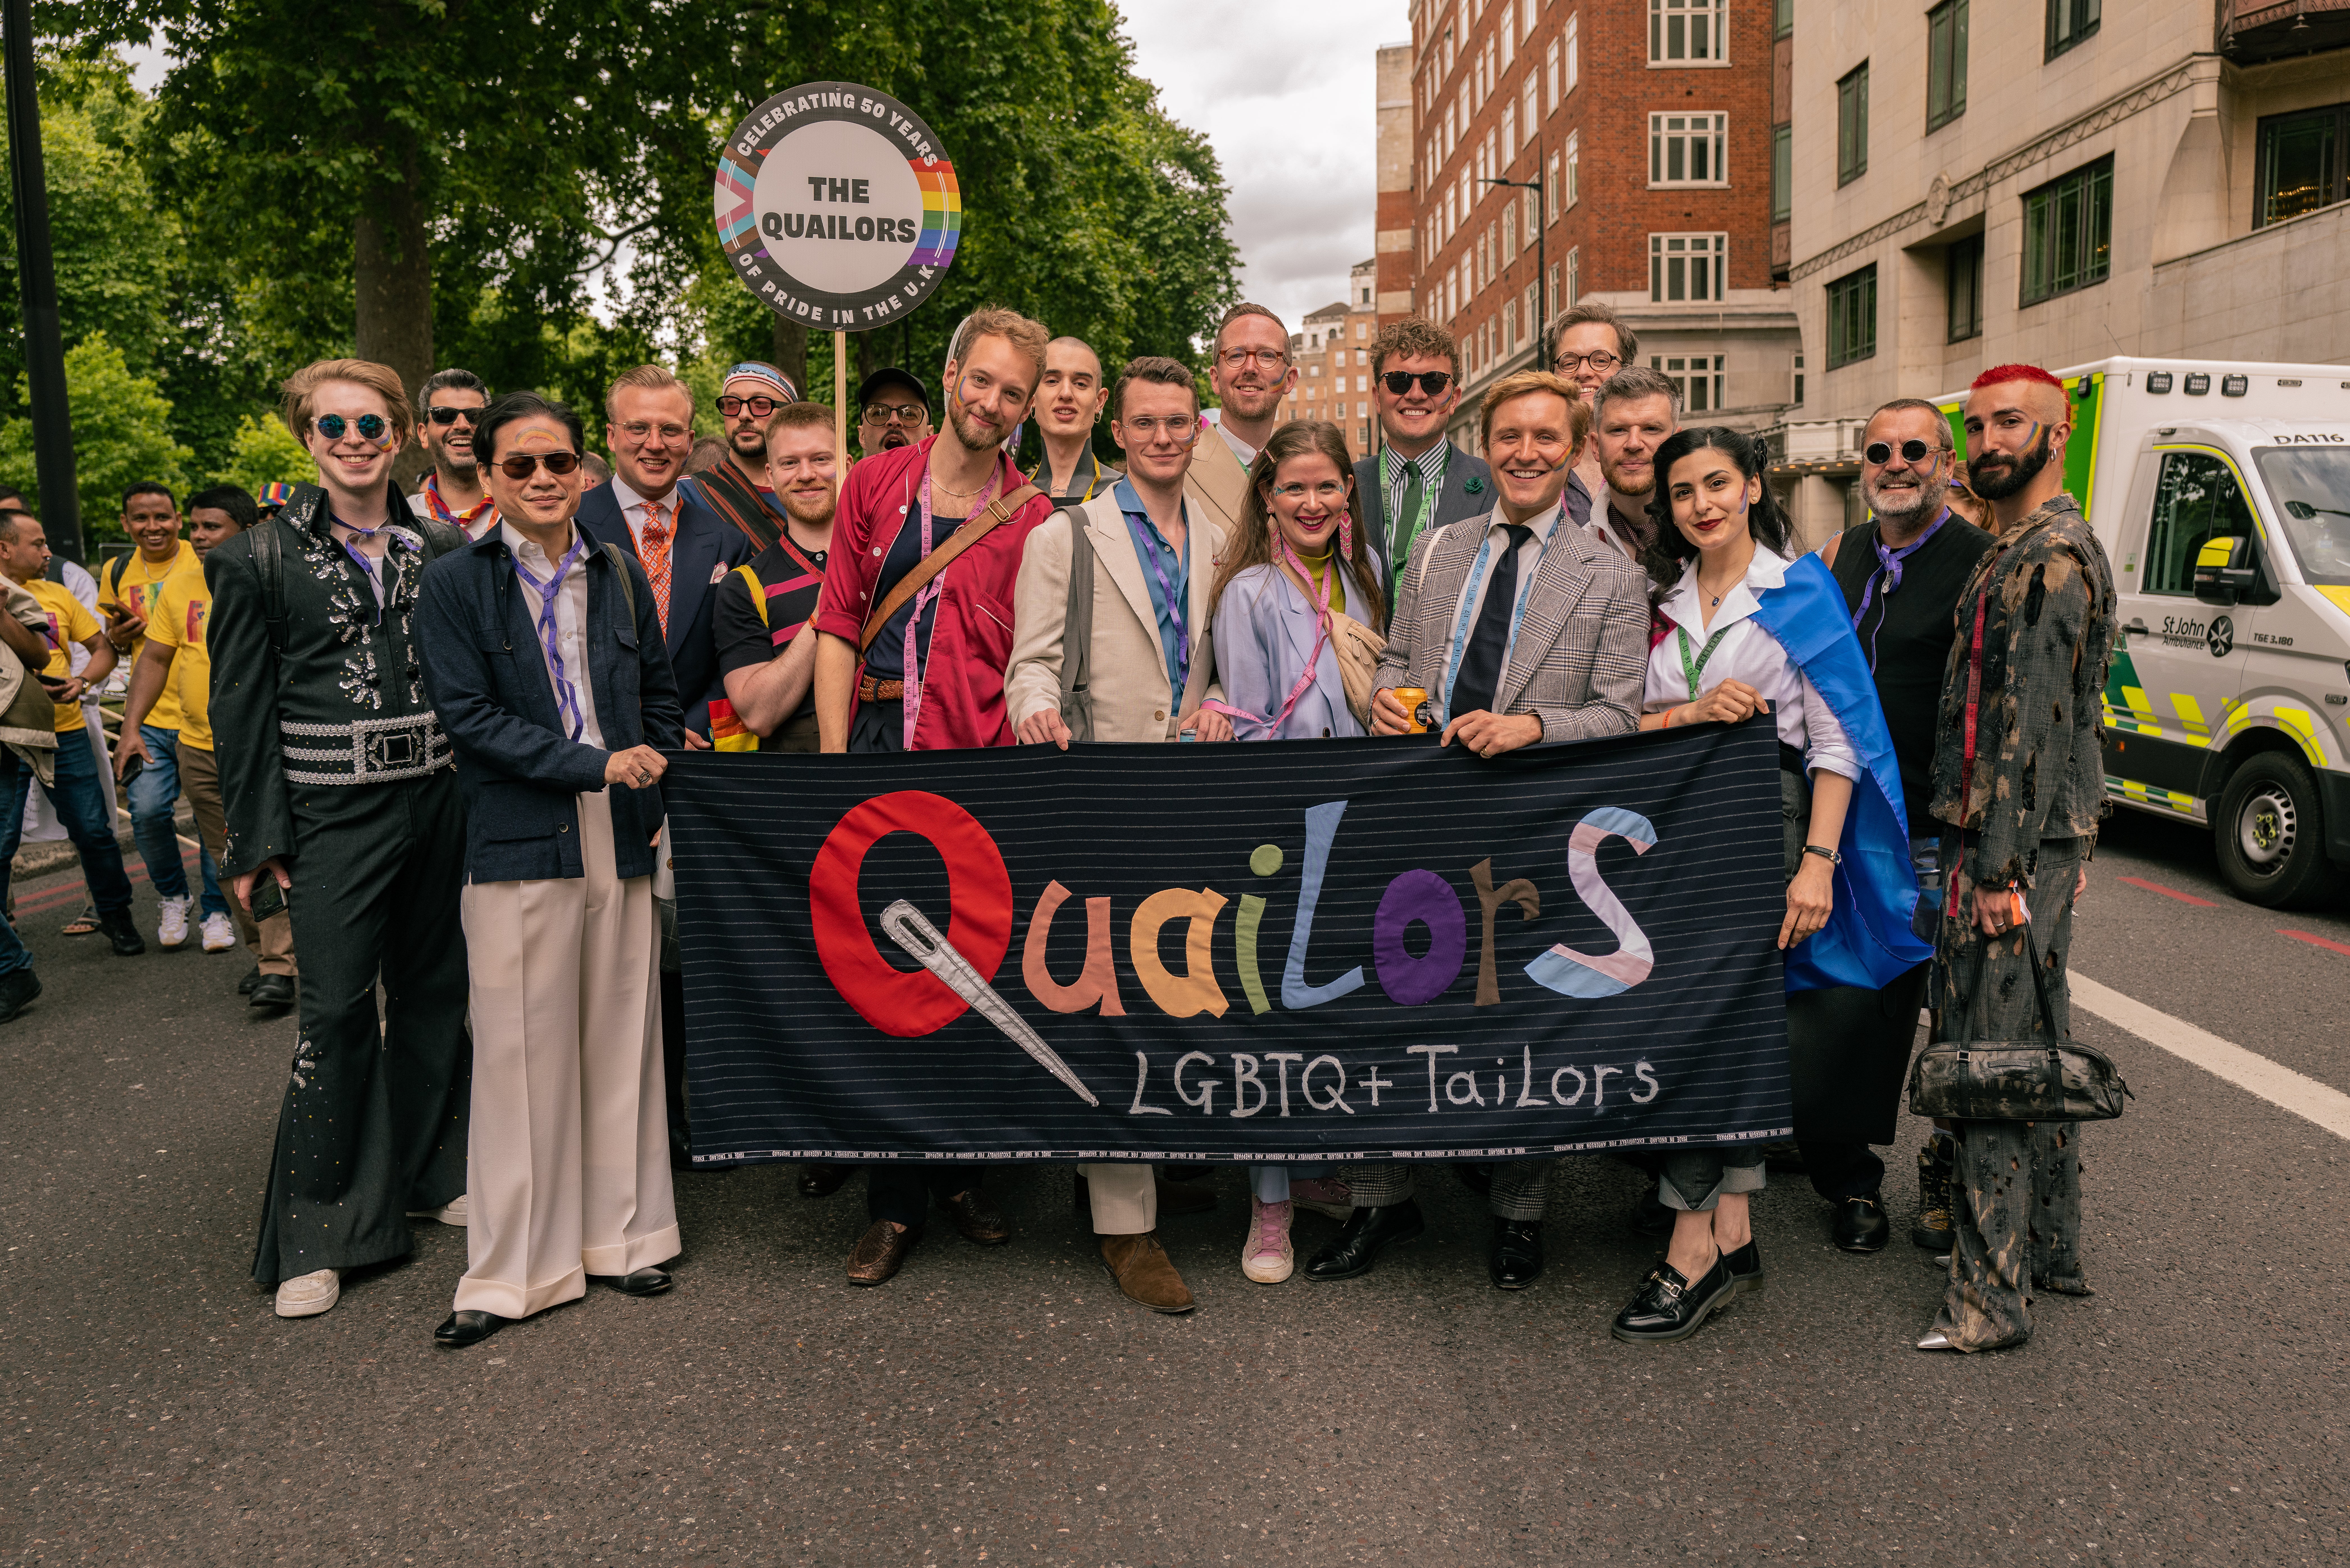 One group marching again this year is Quailors, a group of tailors and crafts people